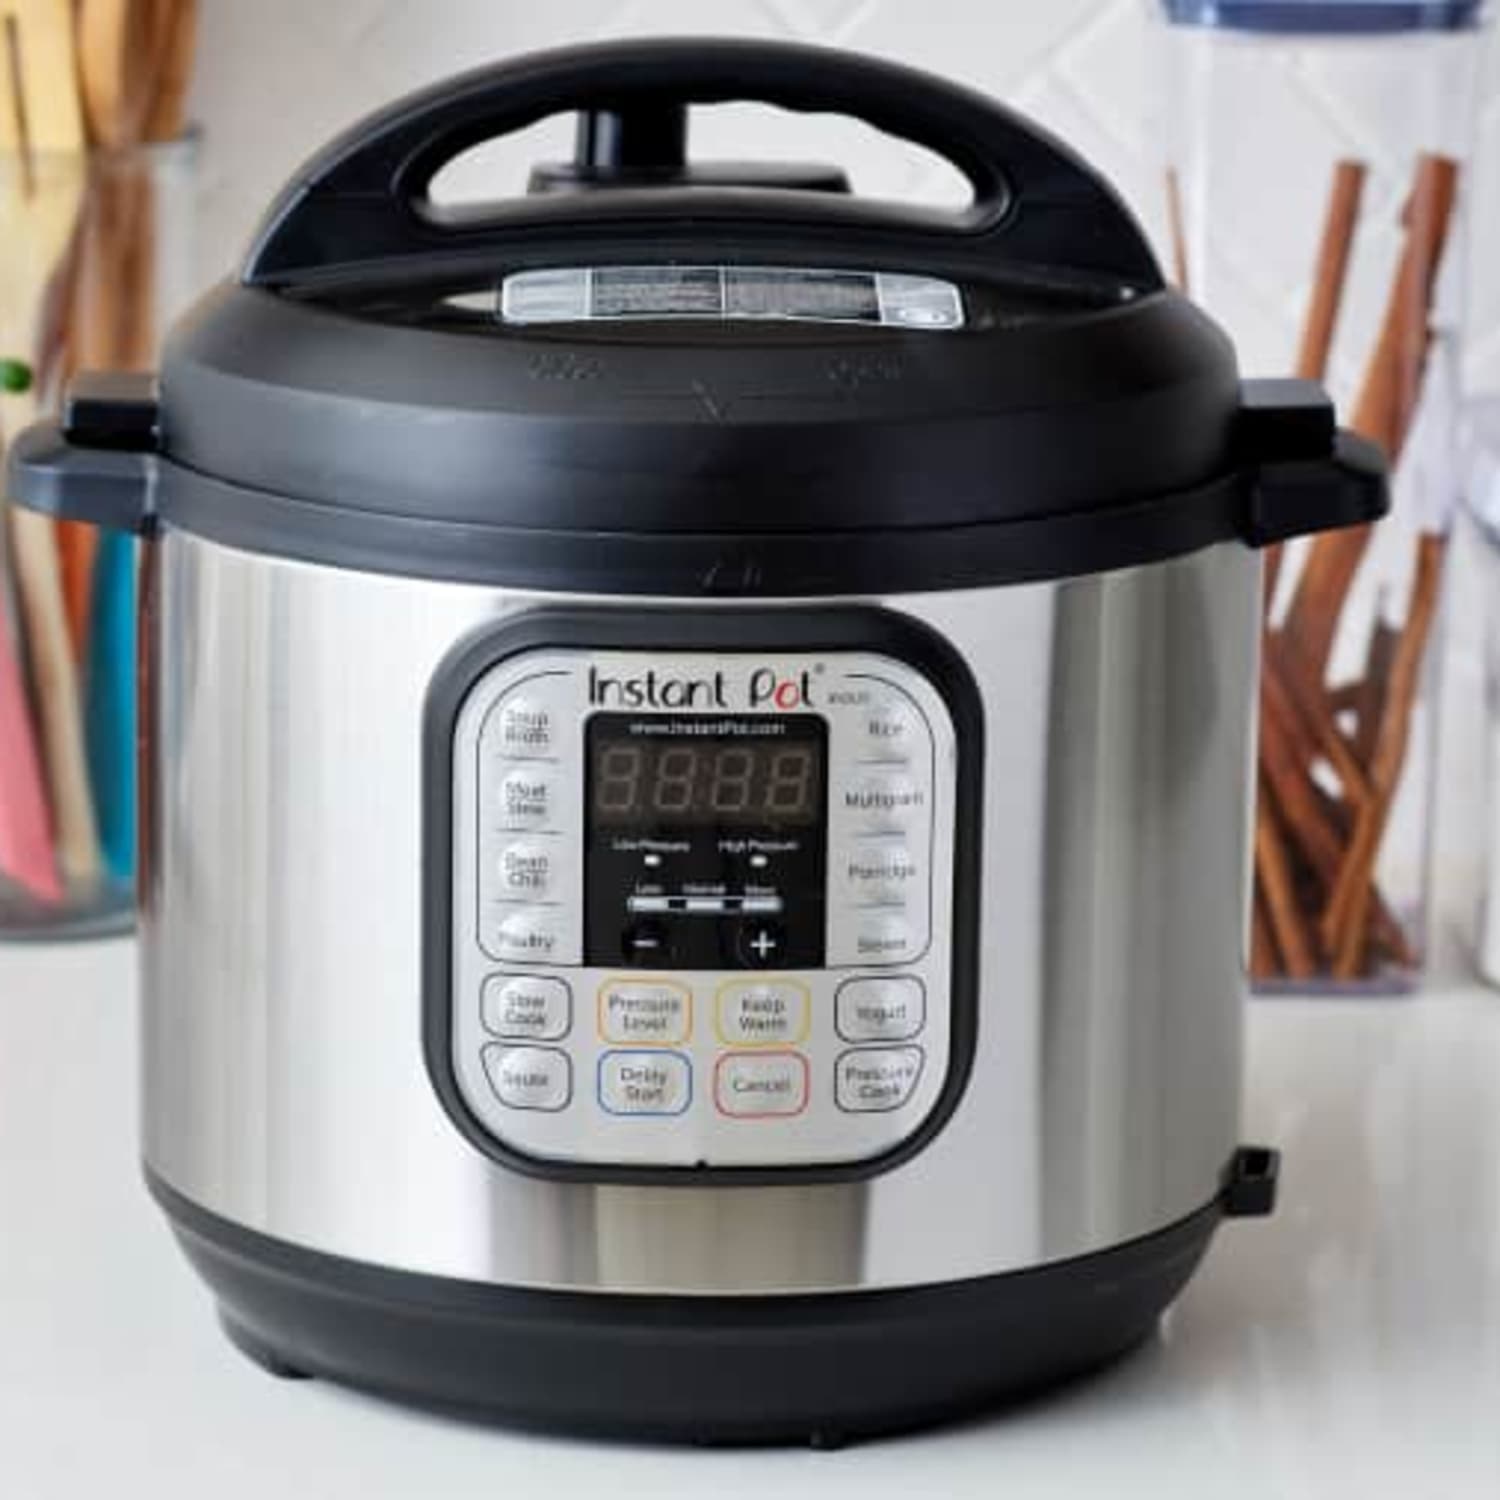 Suitable for instant pot European and American electric pressure